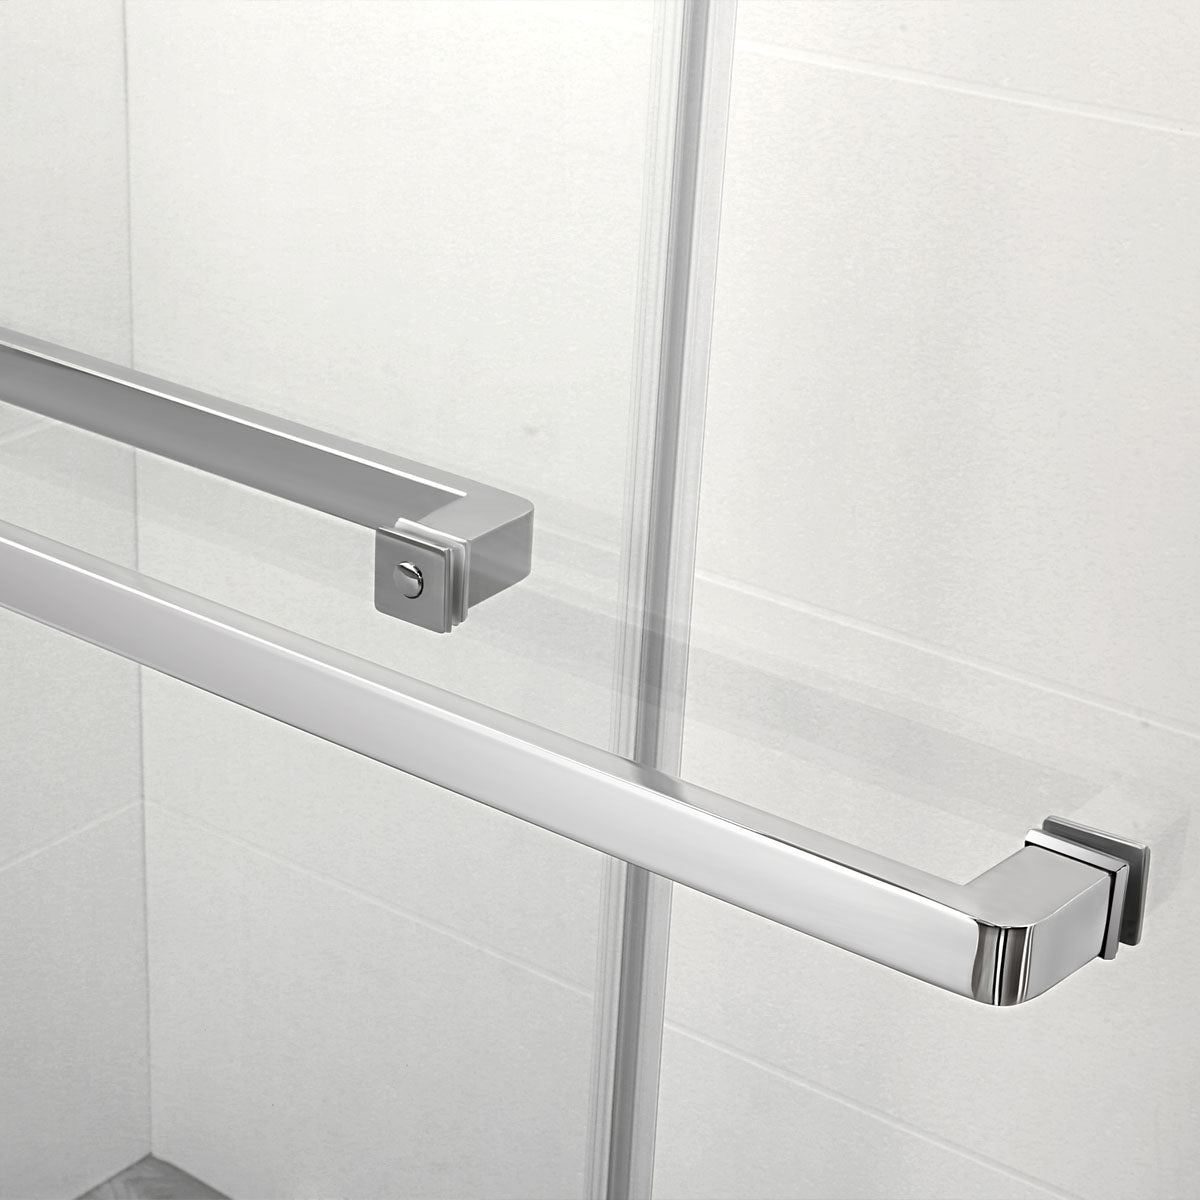 60 Tub Door Frameless Bypass  with Klearteck Treatment (3/8" Thickness) (Chrome) Ayden  Series - iStyle Bath